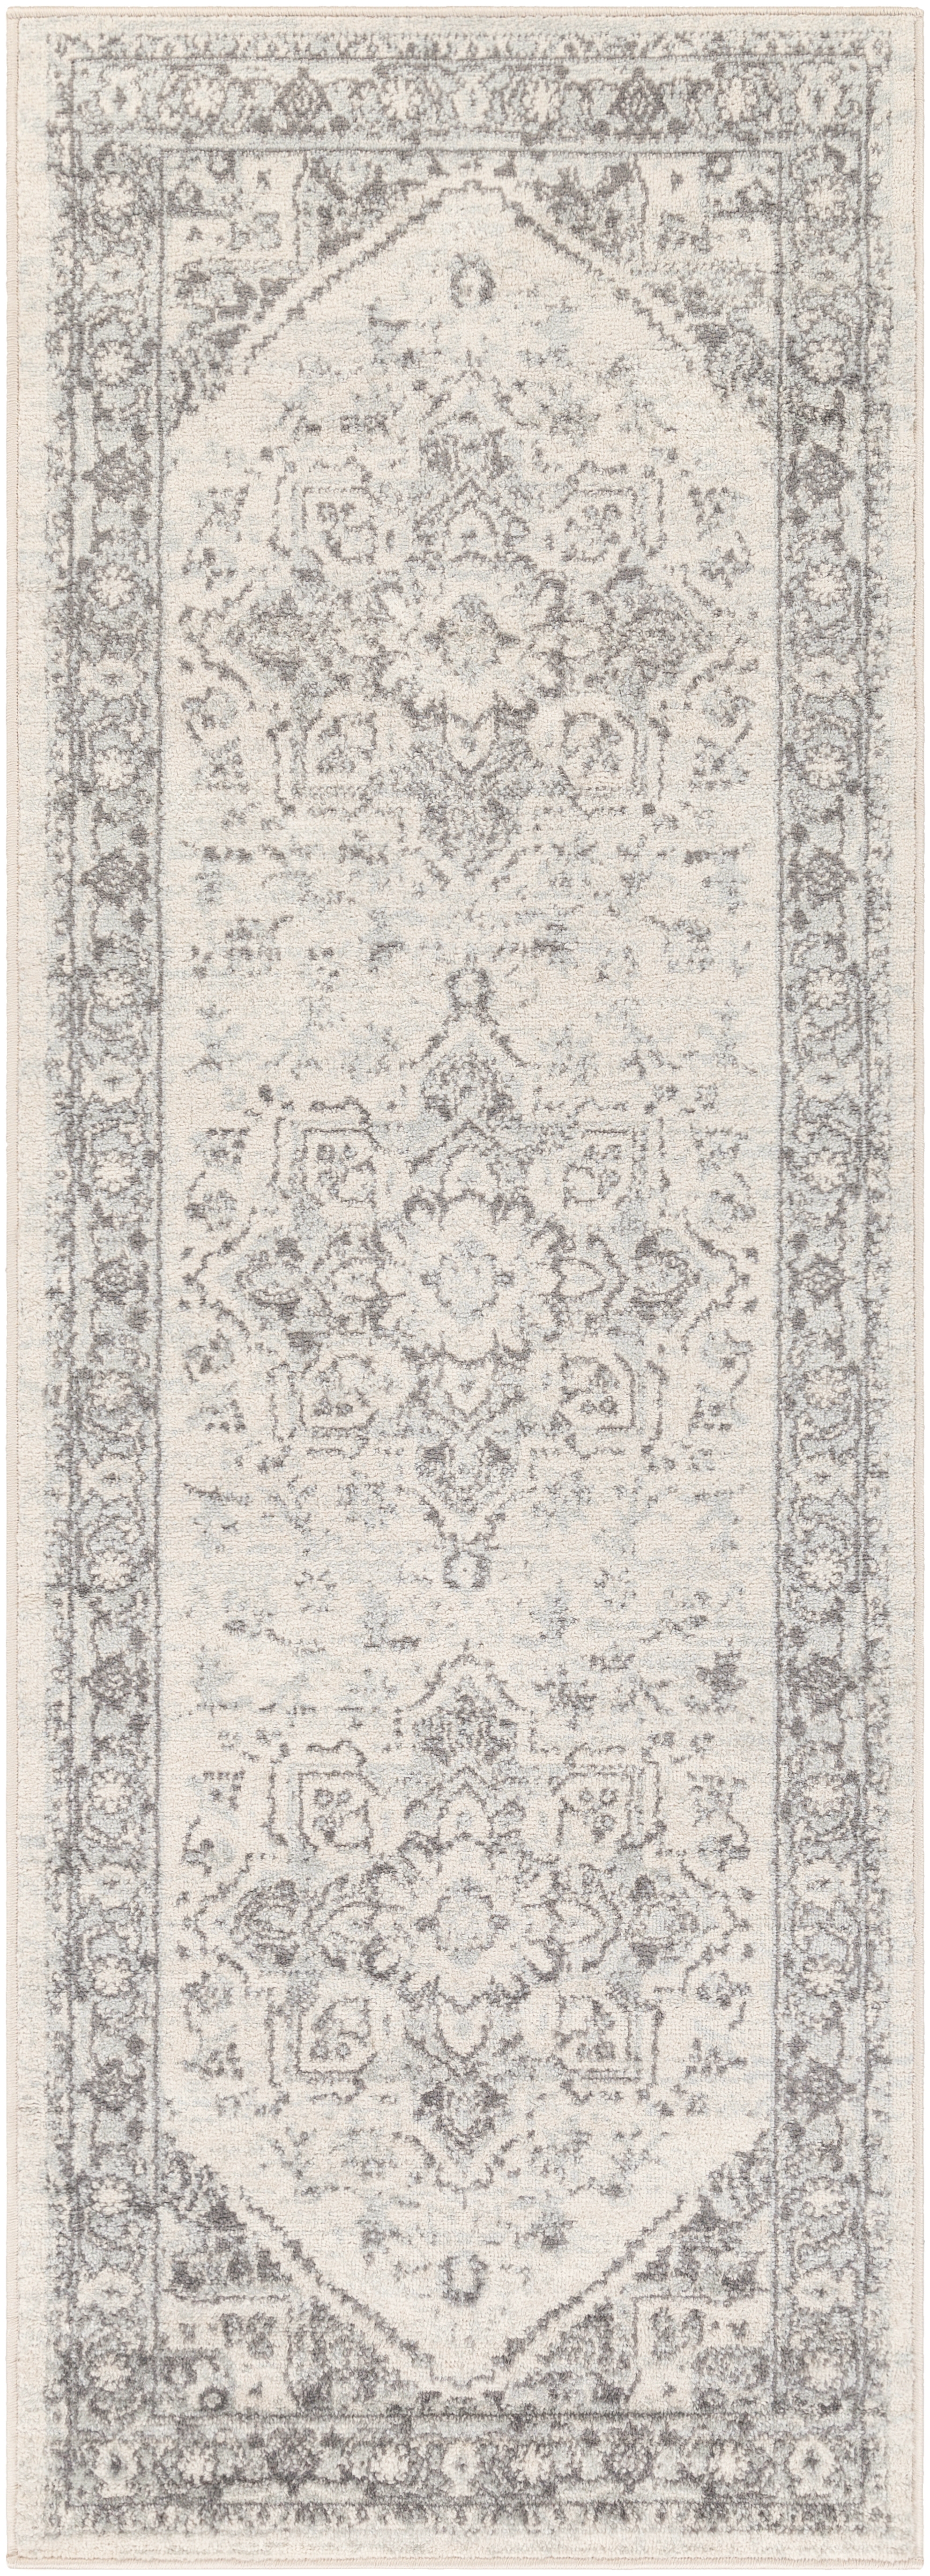 Chester Rug, 2'7" x 7'3" - Image 0